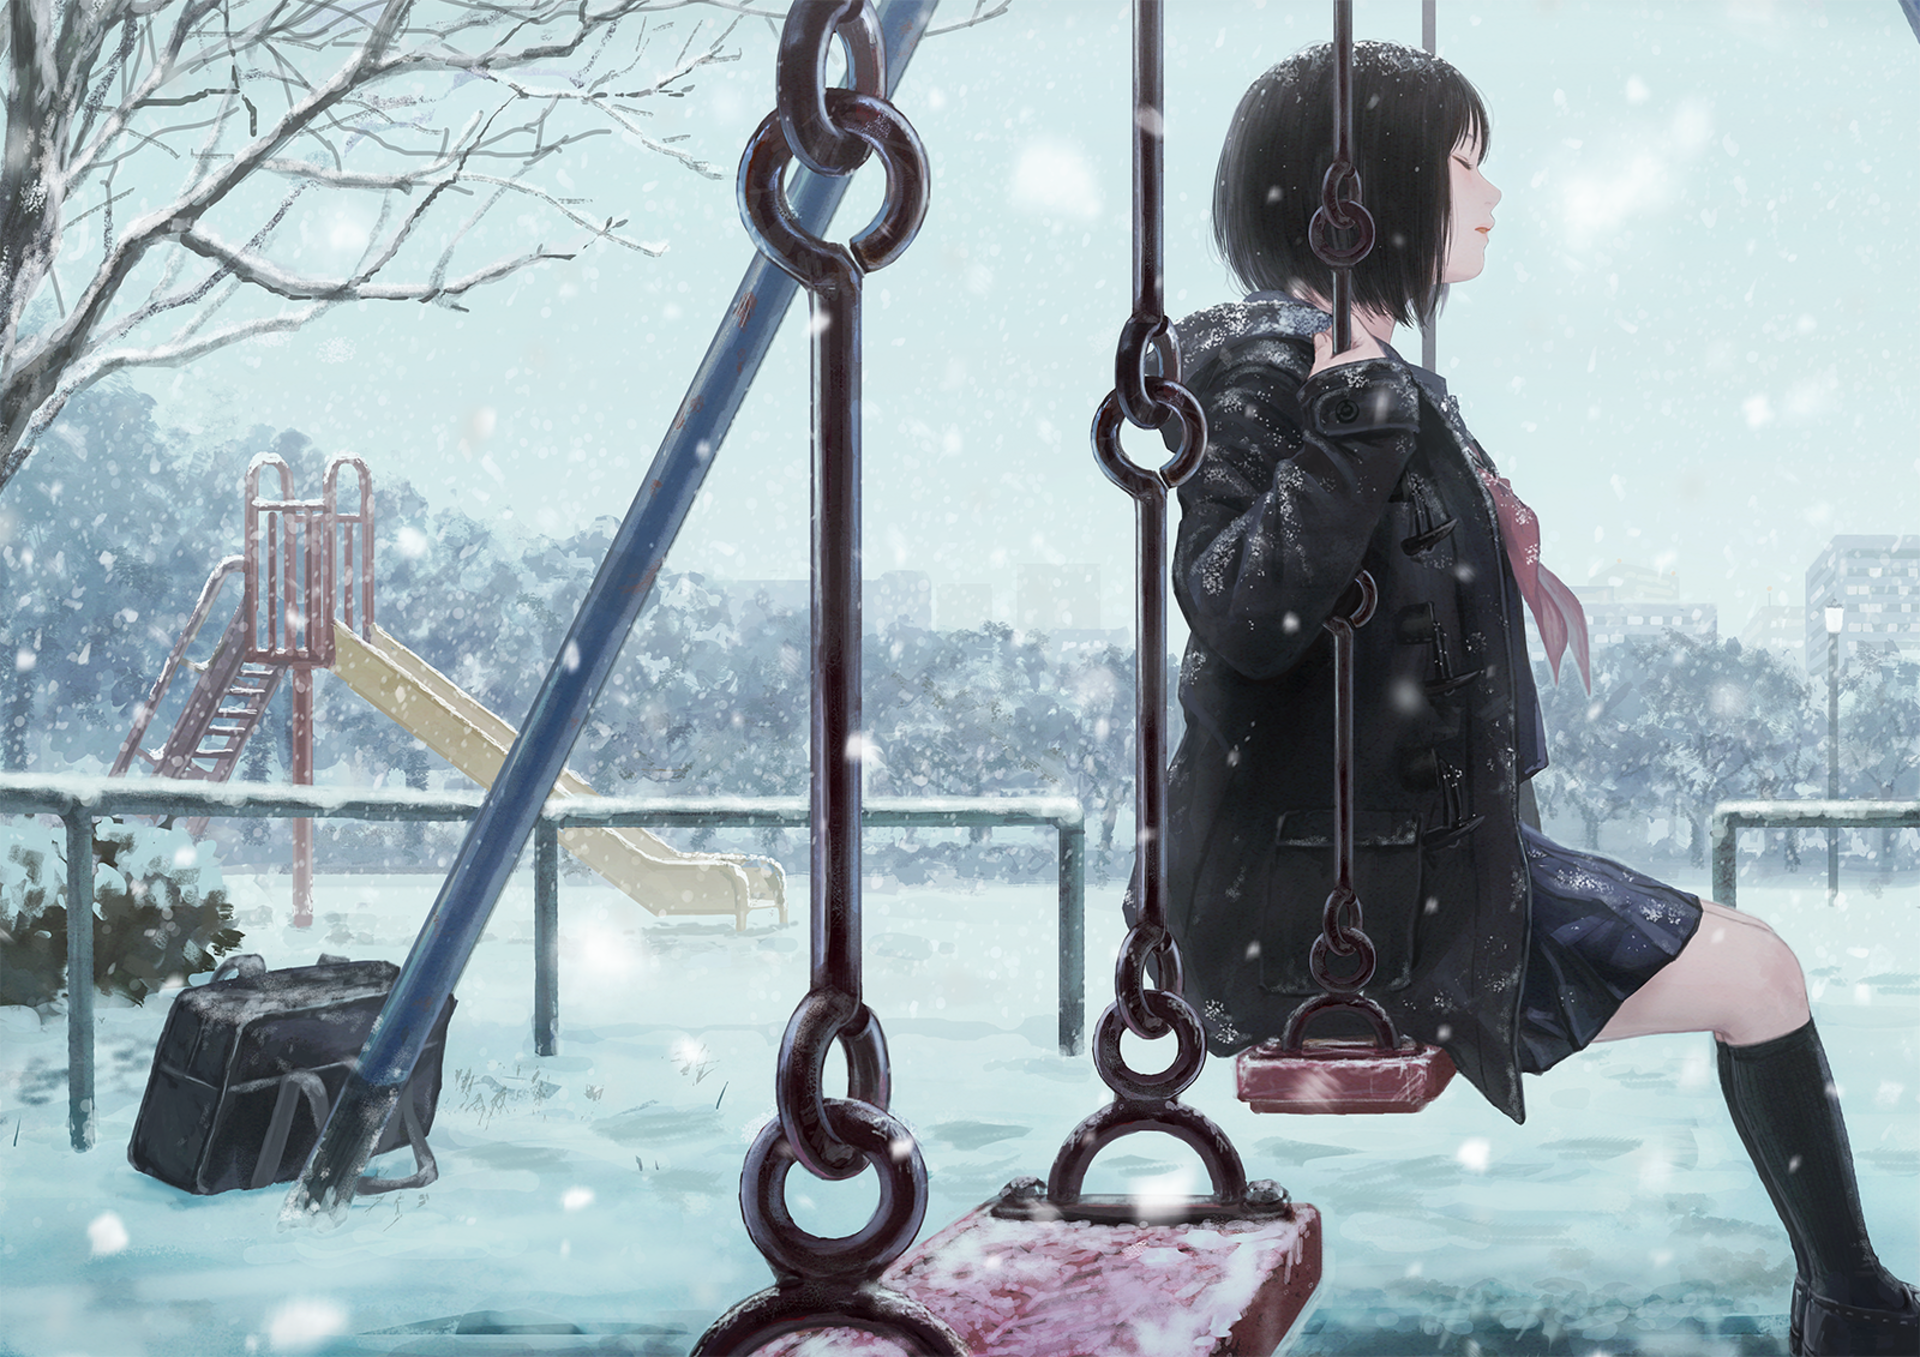 Anime girl on a swing on a calm winter day by romiy